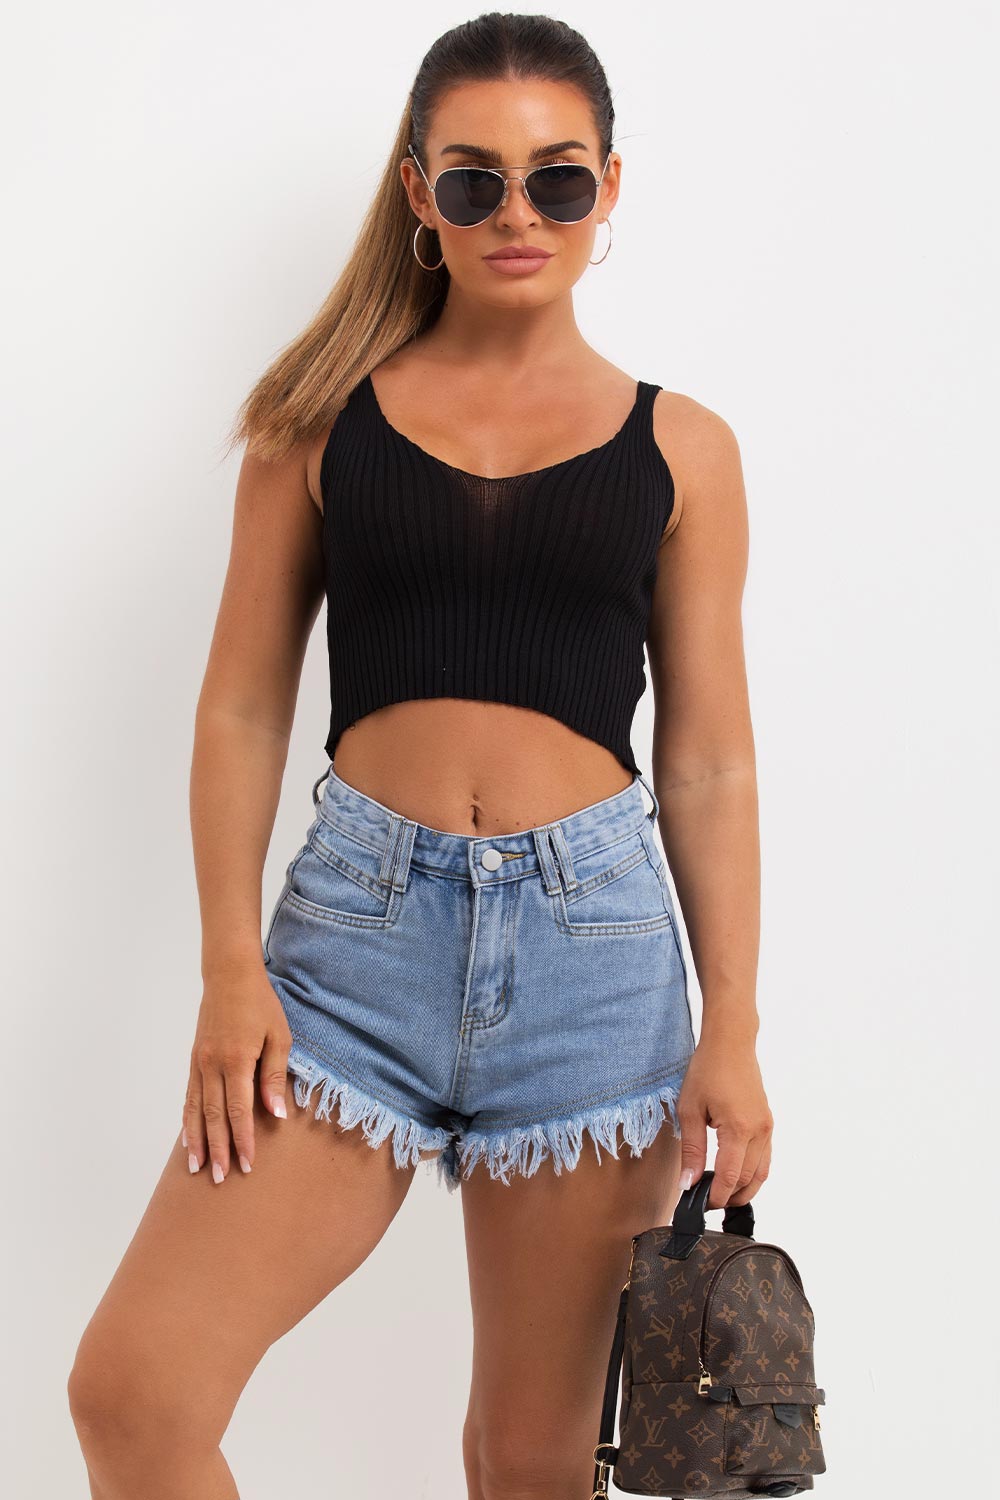 knitted crop top